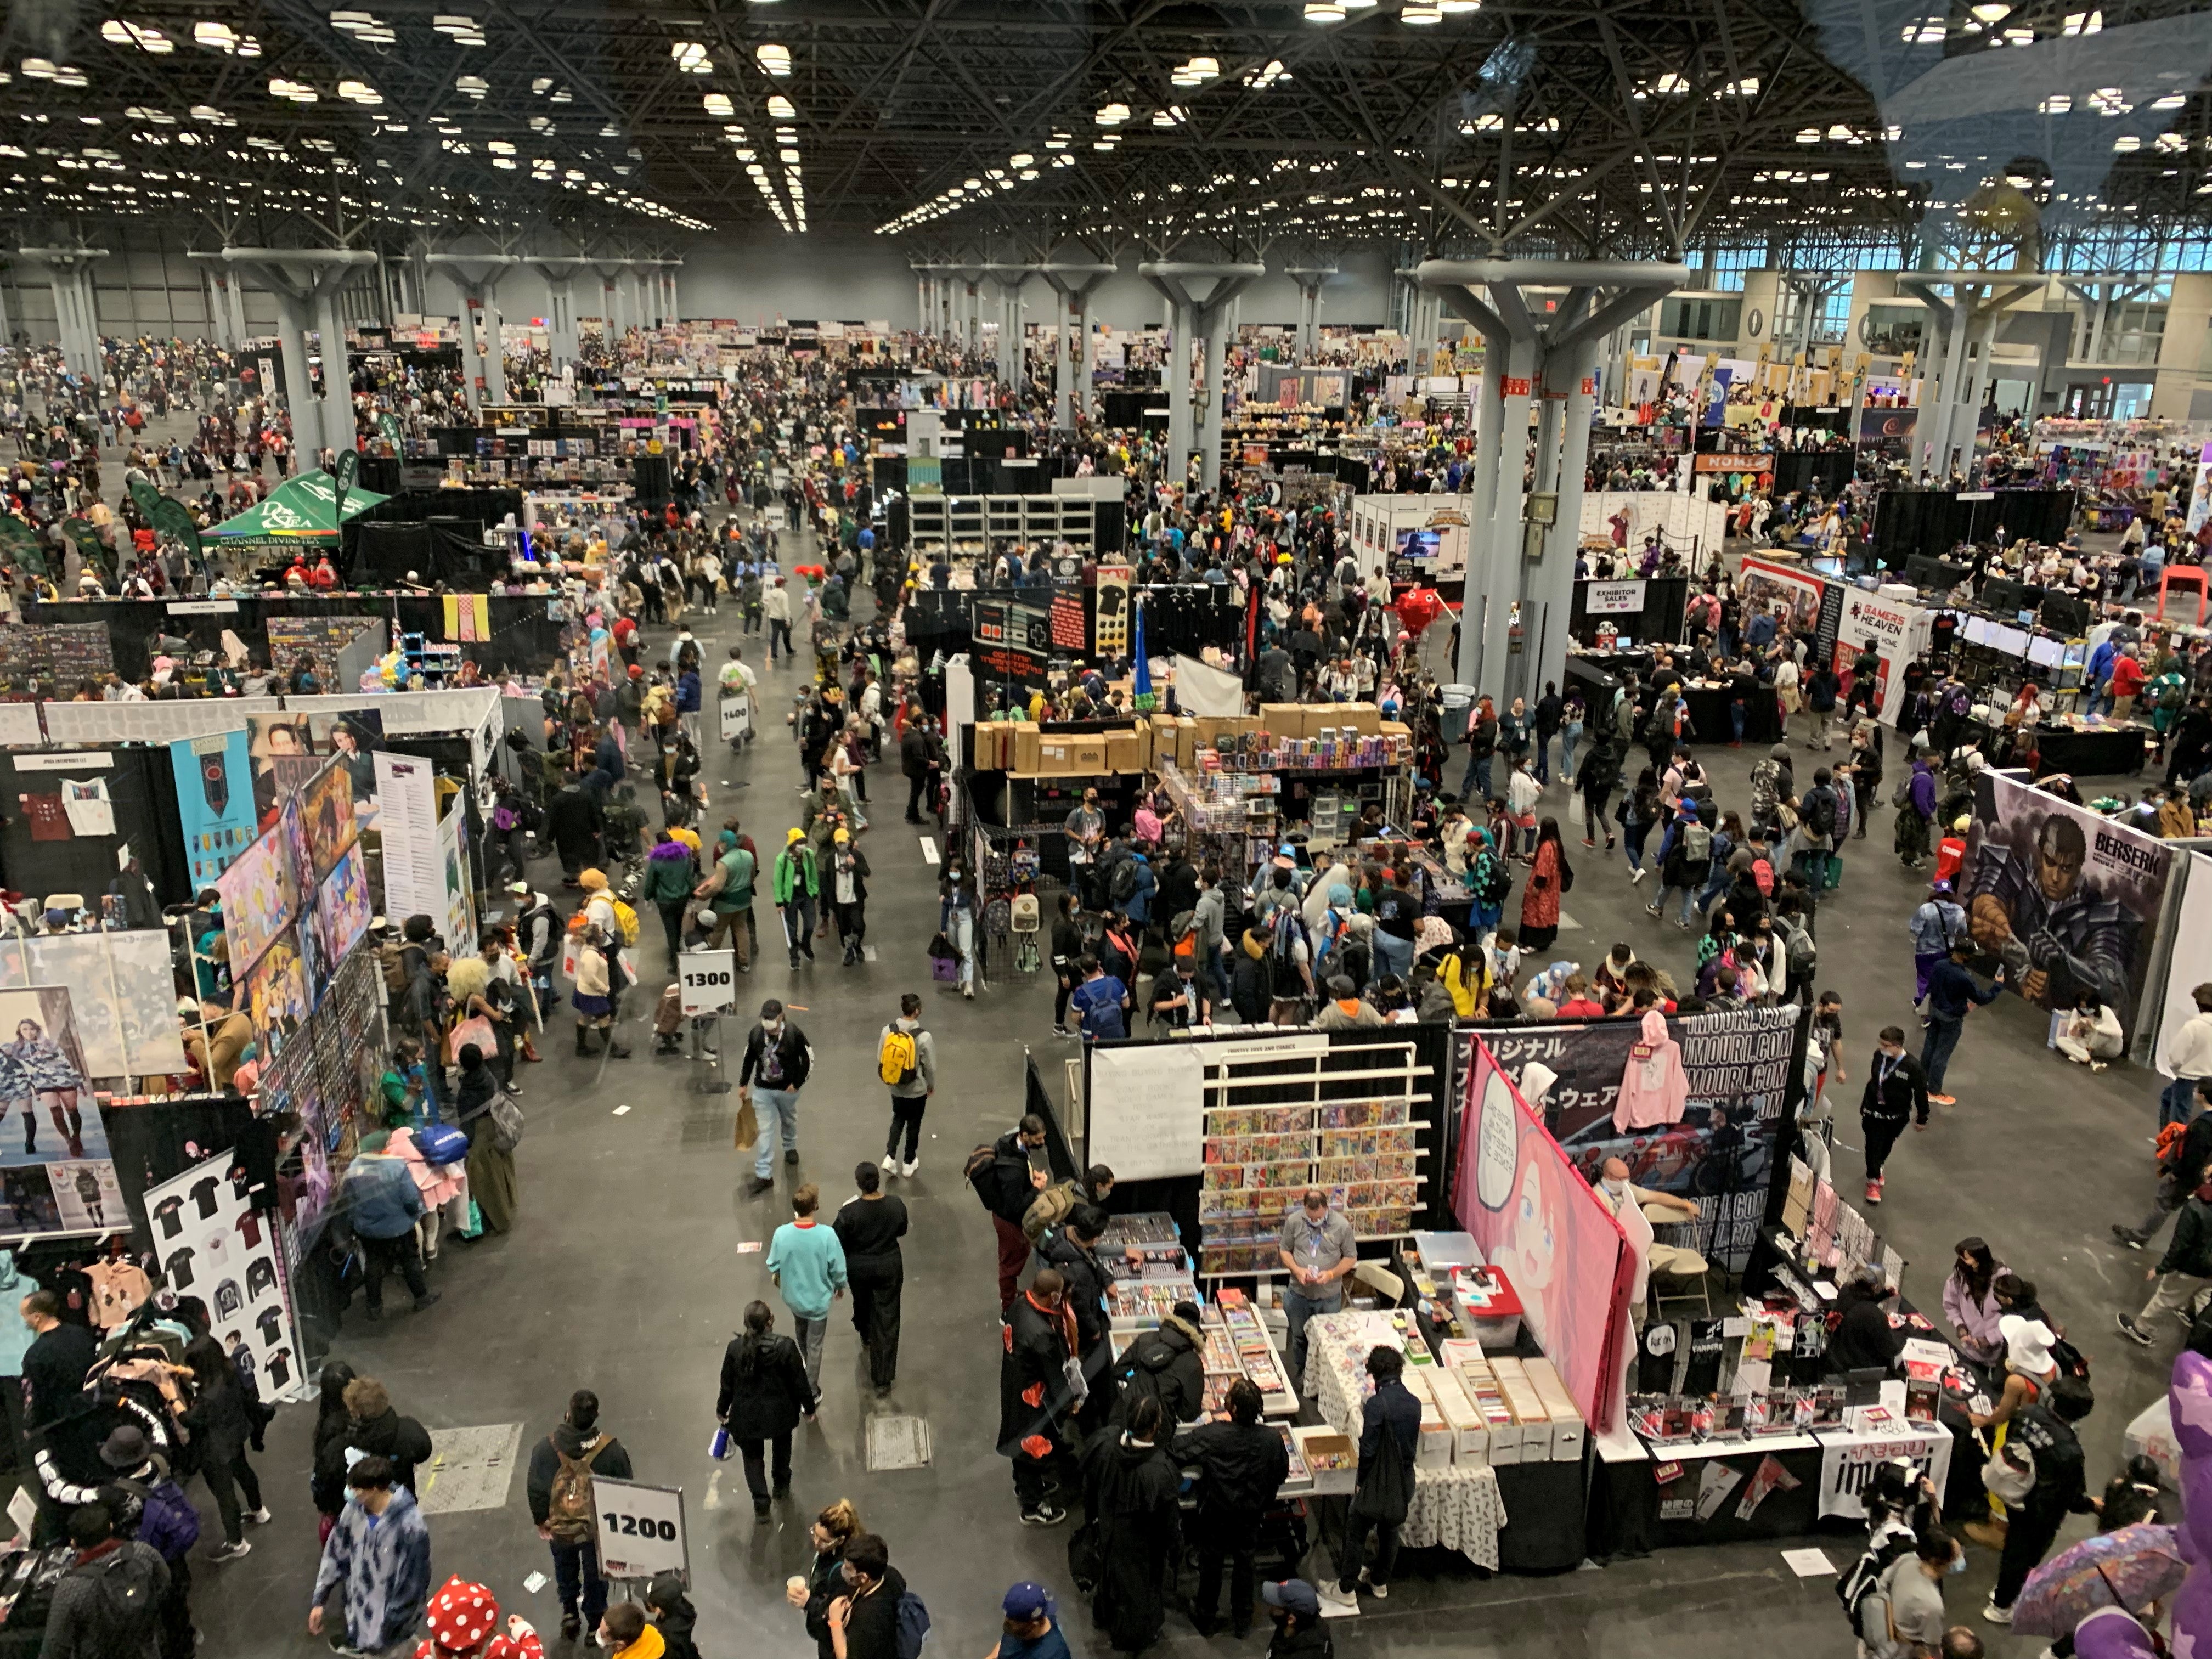 COSplay costumes at Fan Expo Cleveland 2022